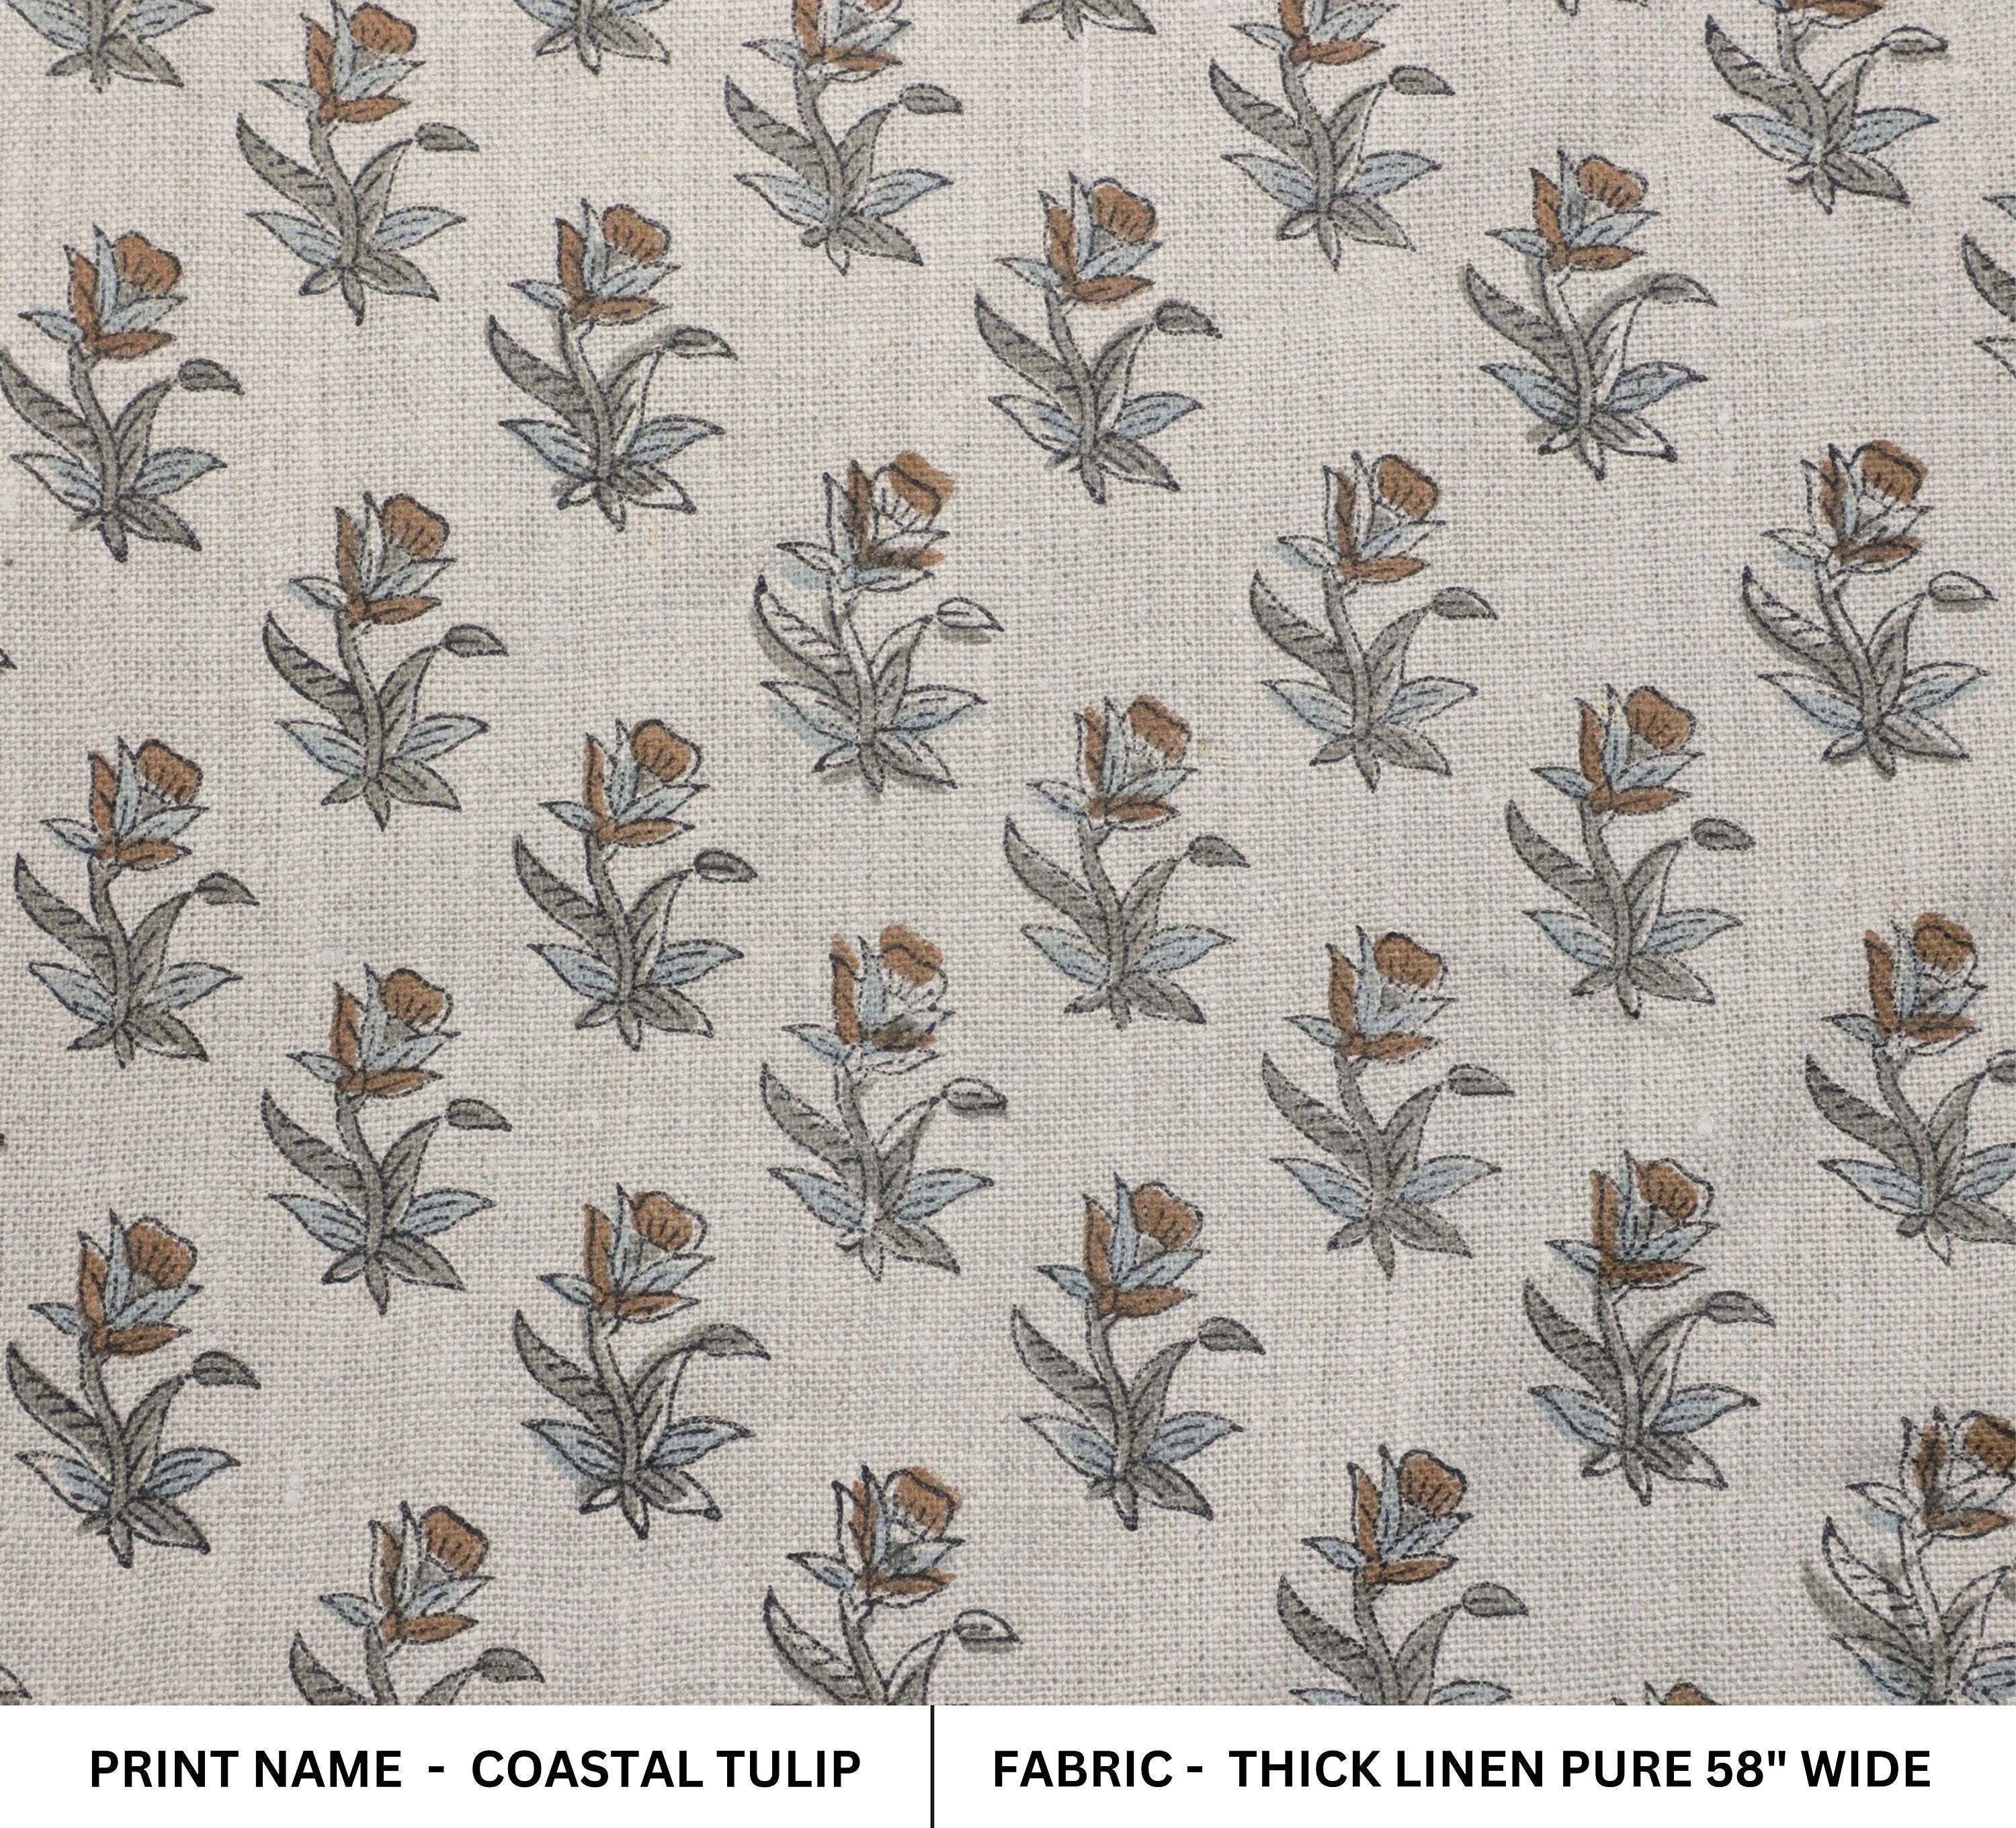 Coastal Tulip Thick Linen Pure Block Print  Block Print Fabric, Printed Linen Fabric, Block Print Upholstery Fabric, By The Yard, Linen Fabric,